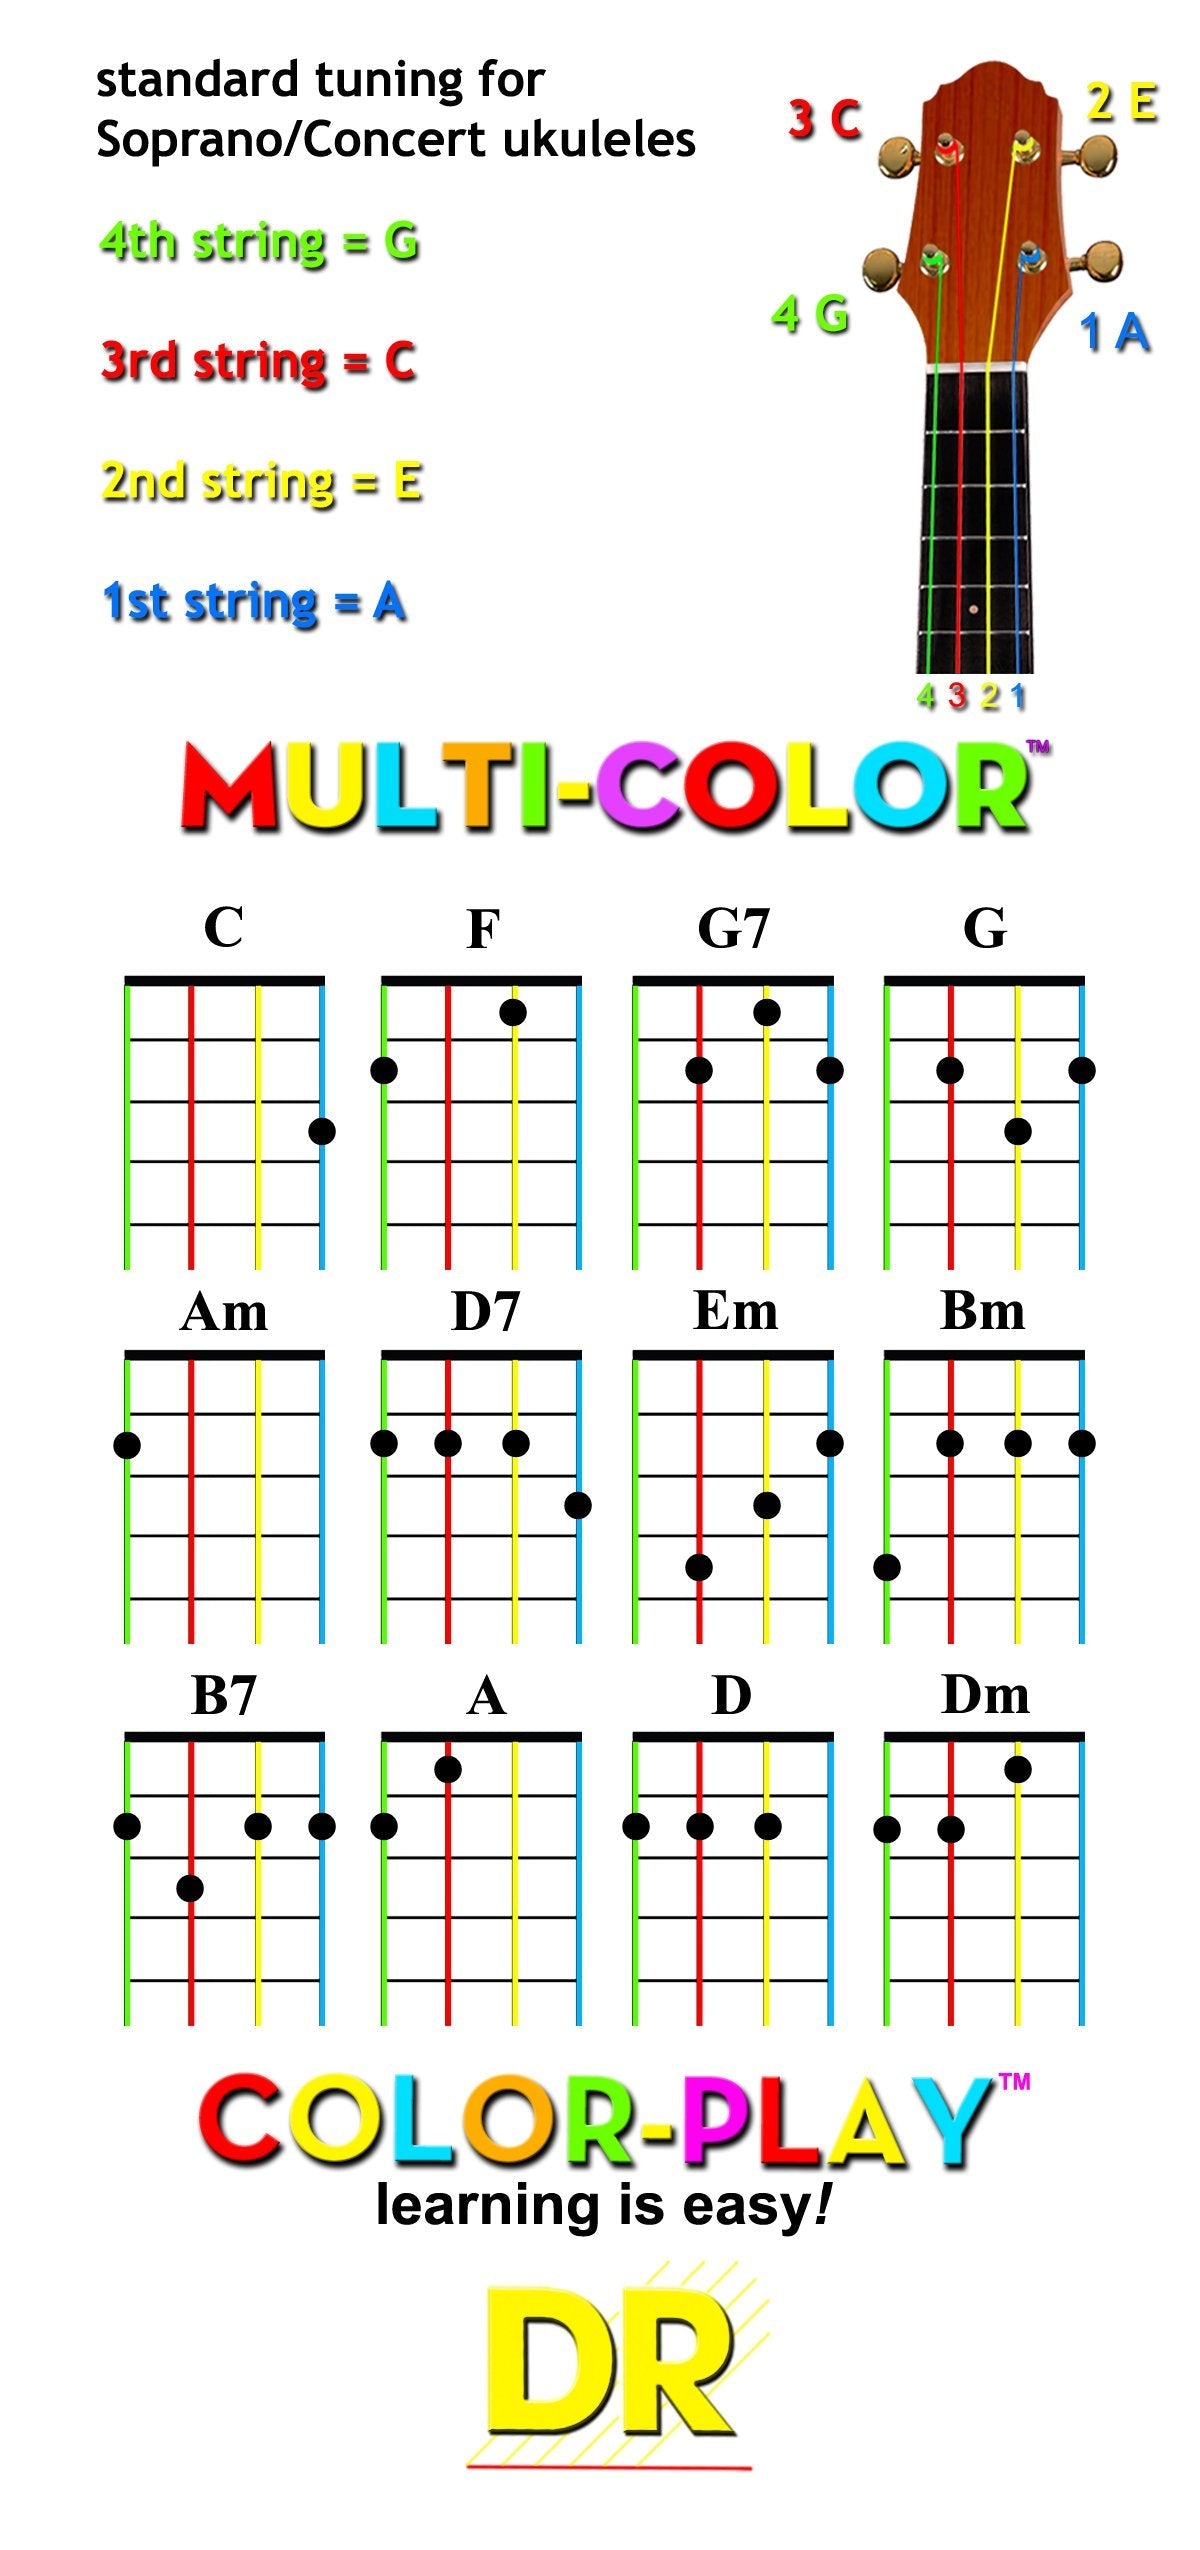 DR Multi-Color UKULELE Strings for Soprano and Concert with FREE Chord Chart - GuitarPusher